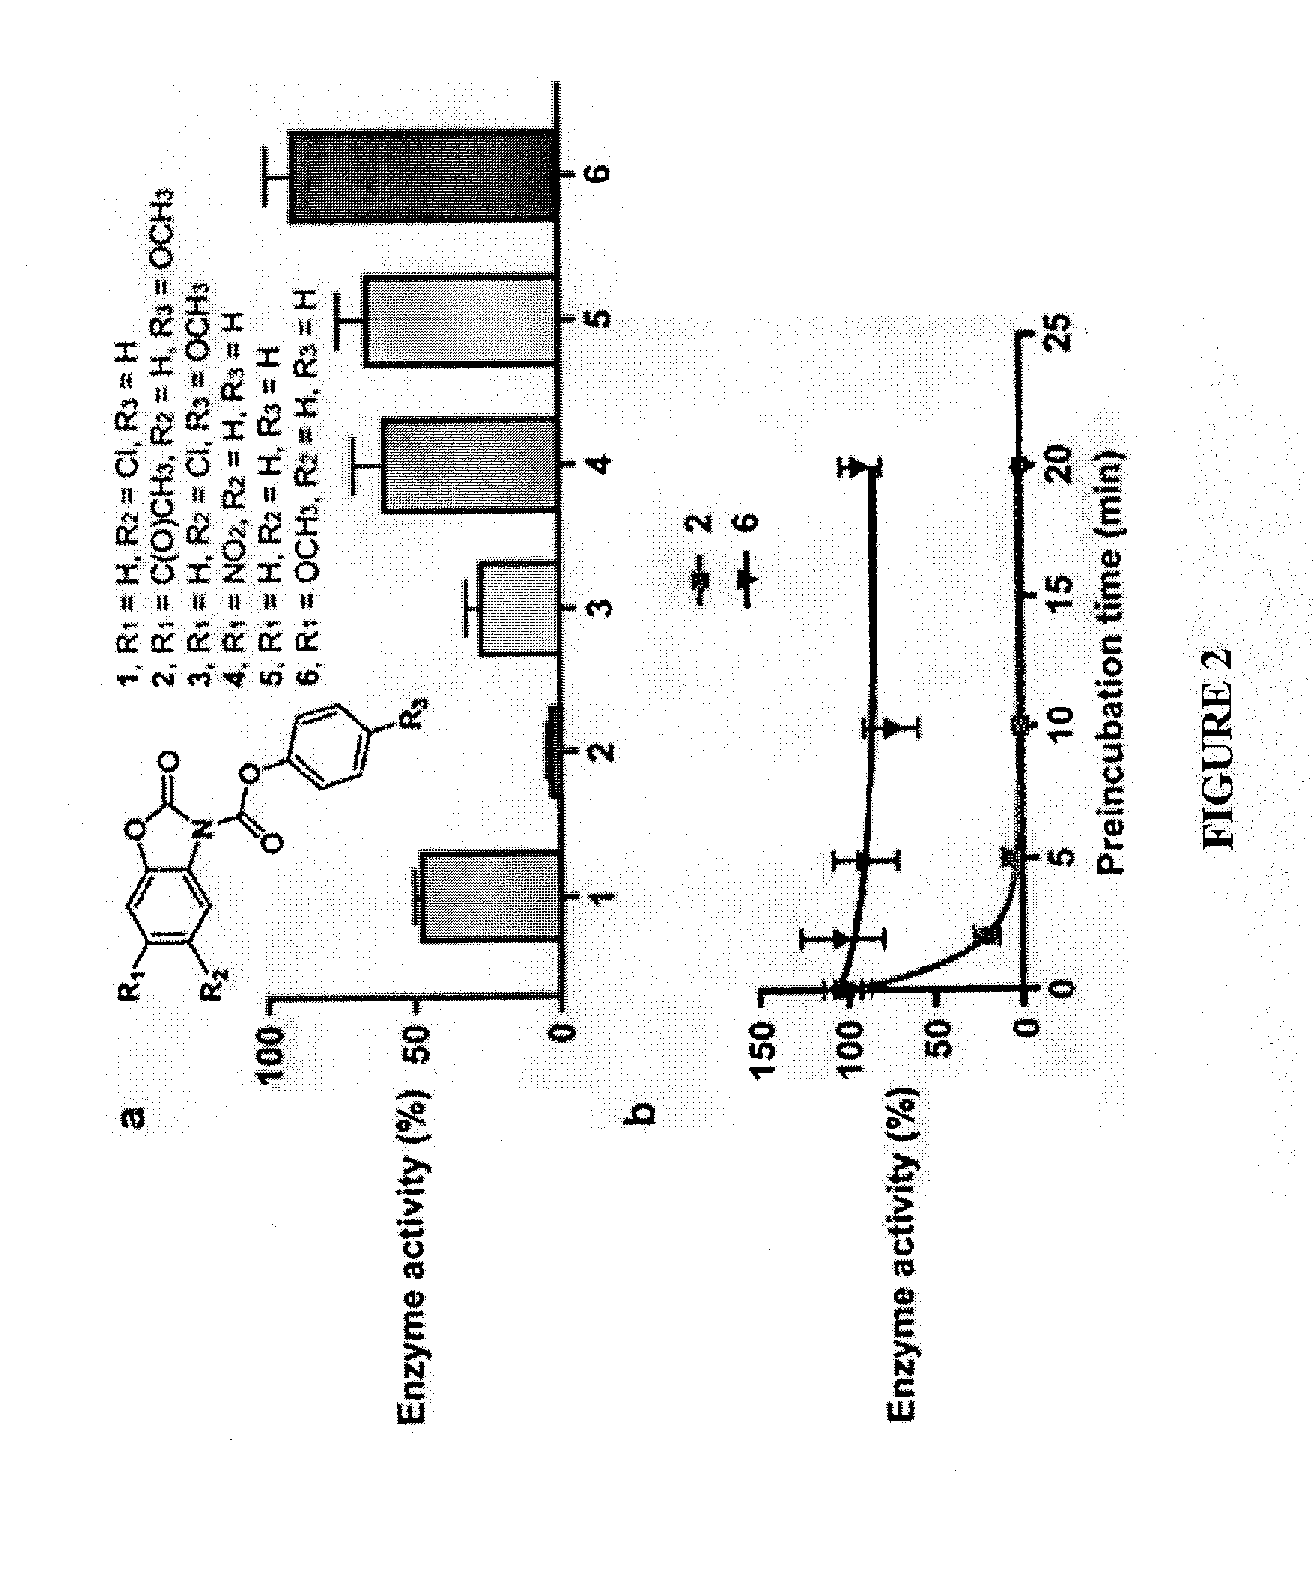 Diphosphate mimetics and uses thereof